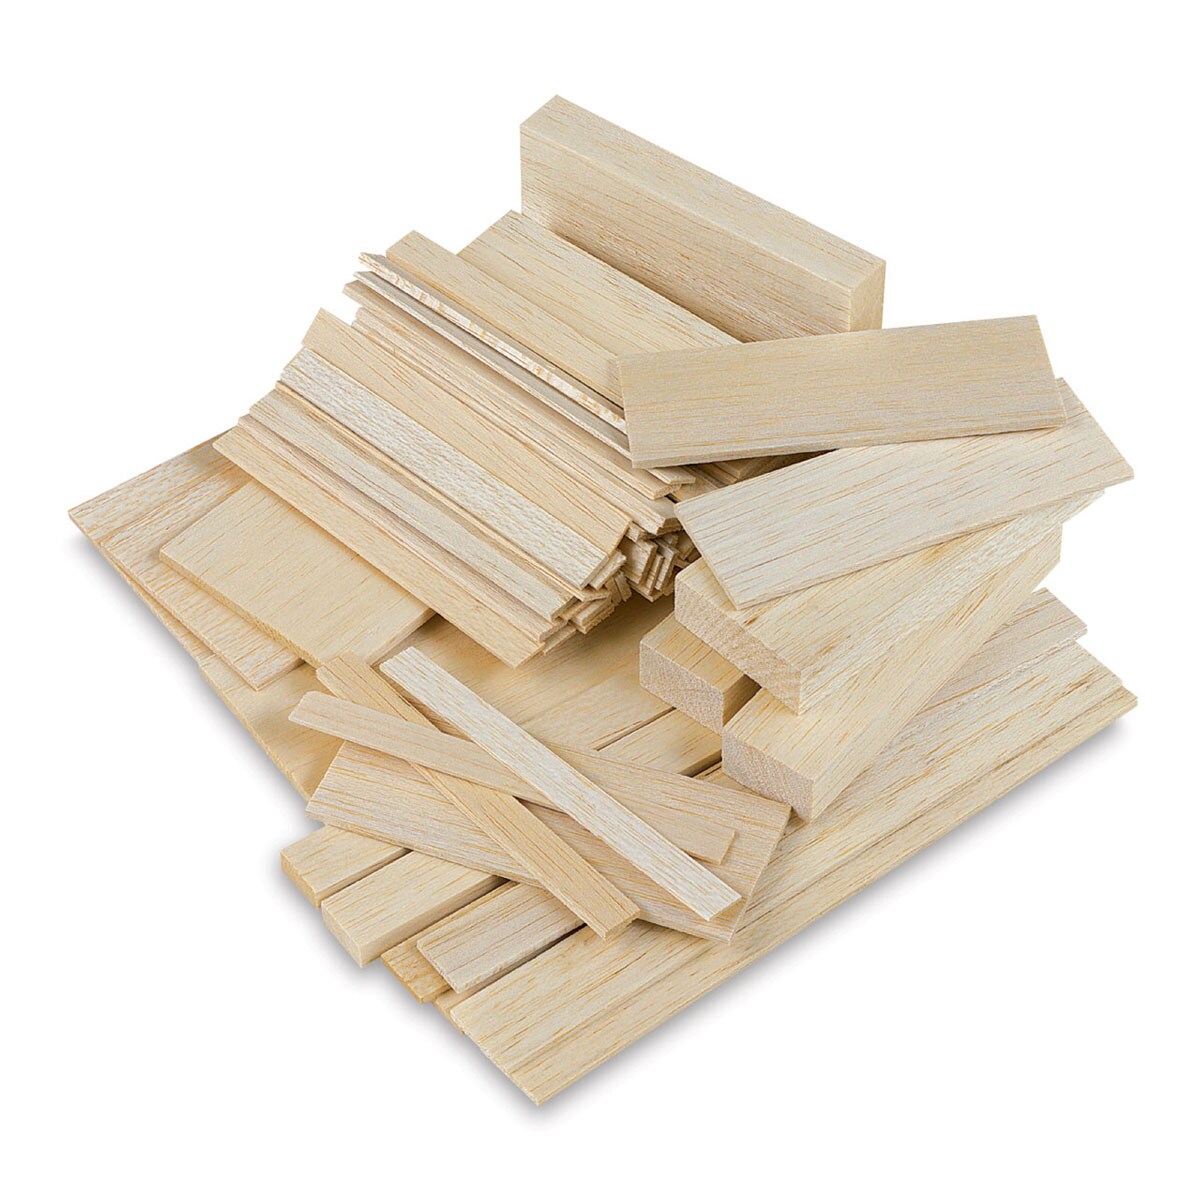 Midwest Products Balsa Bag Assortment - 30 Pieces